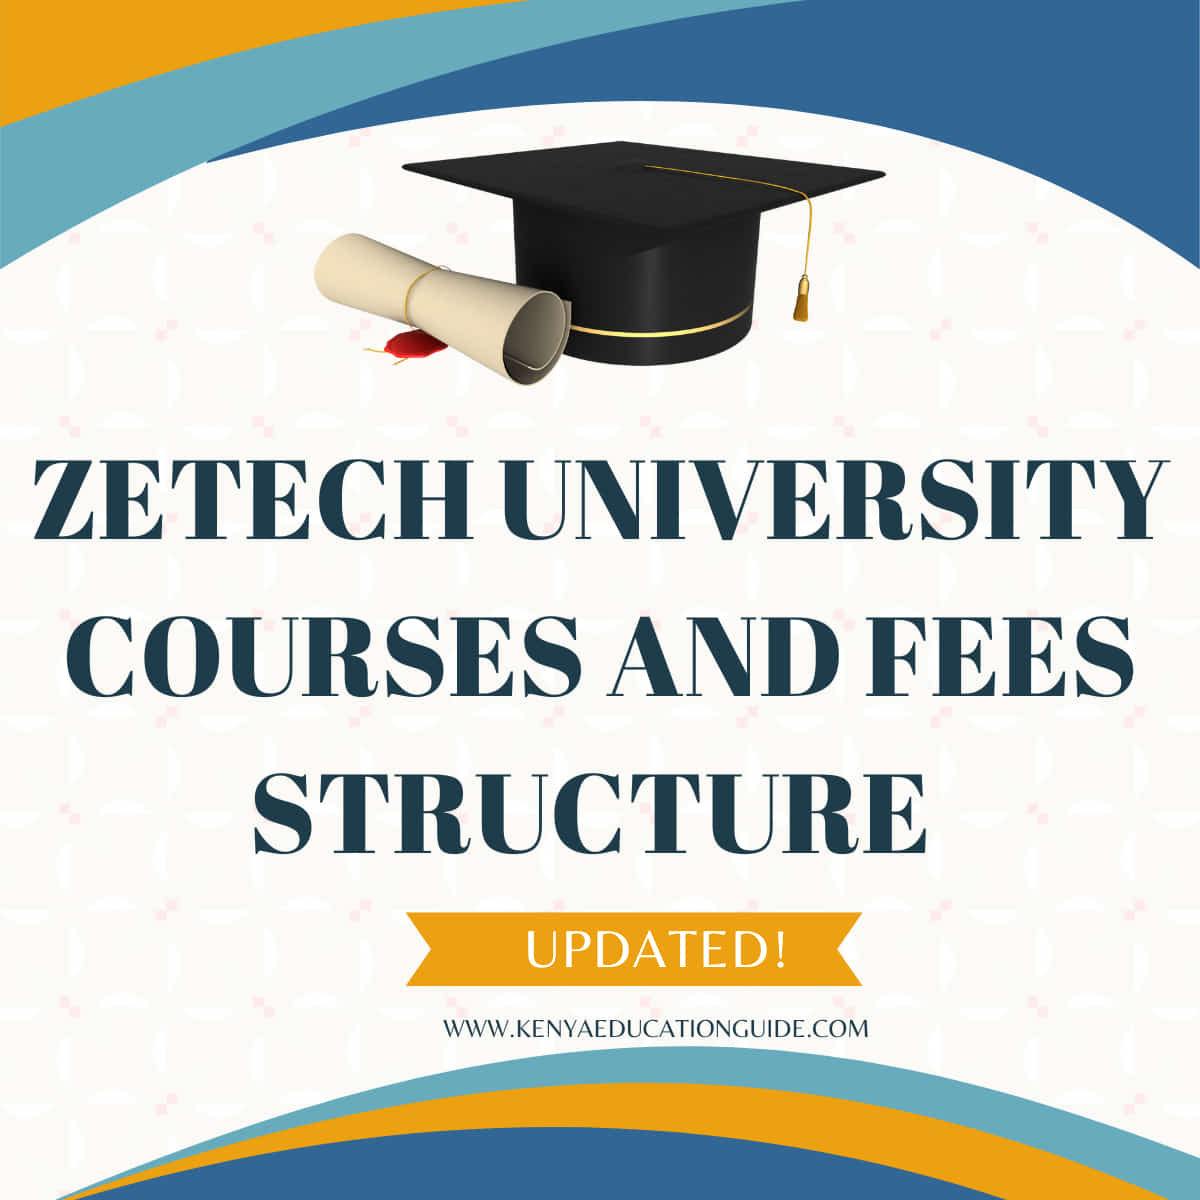 Zetech University courses and fees structure